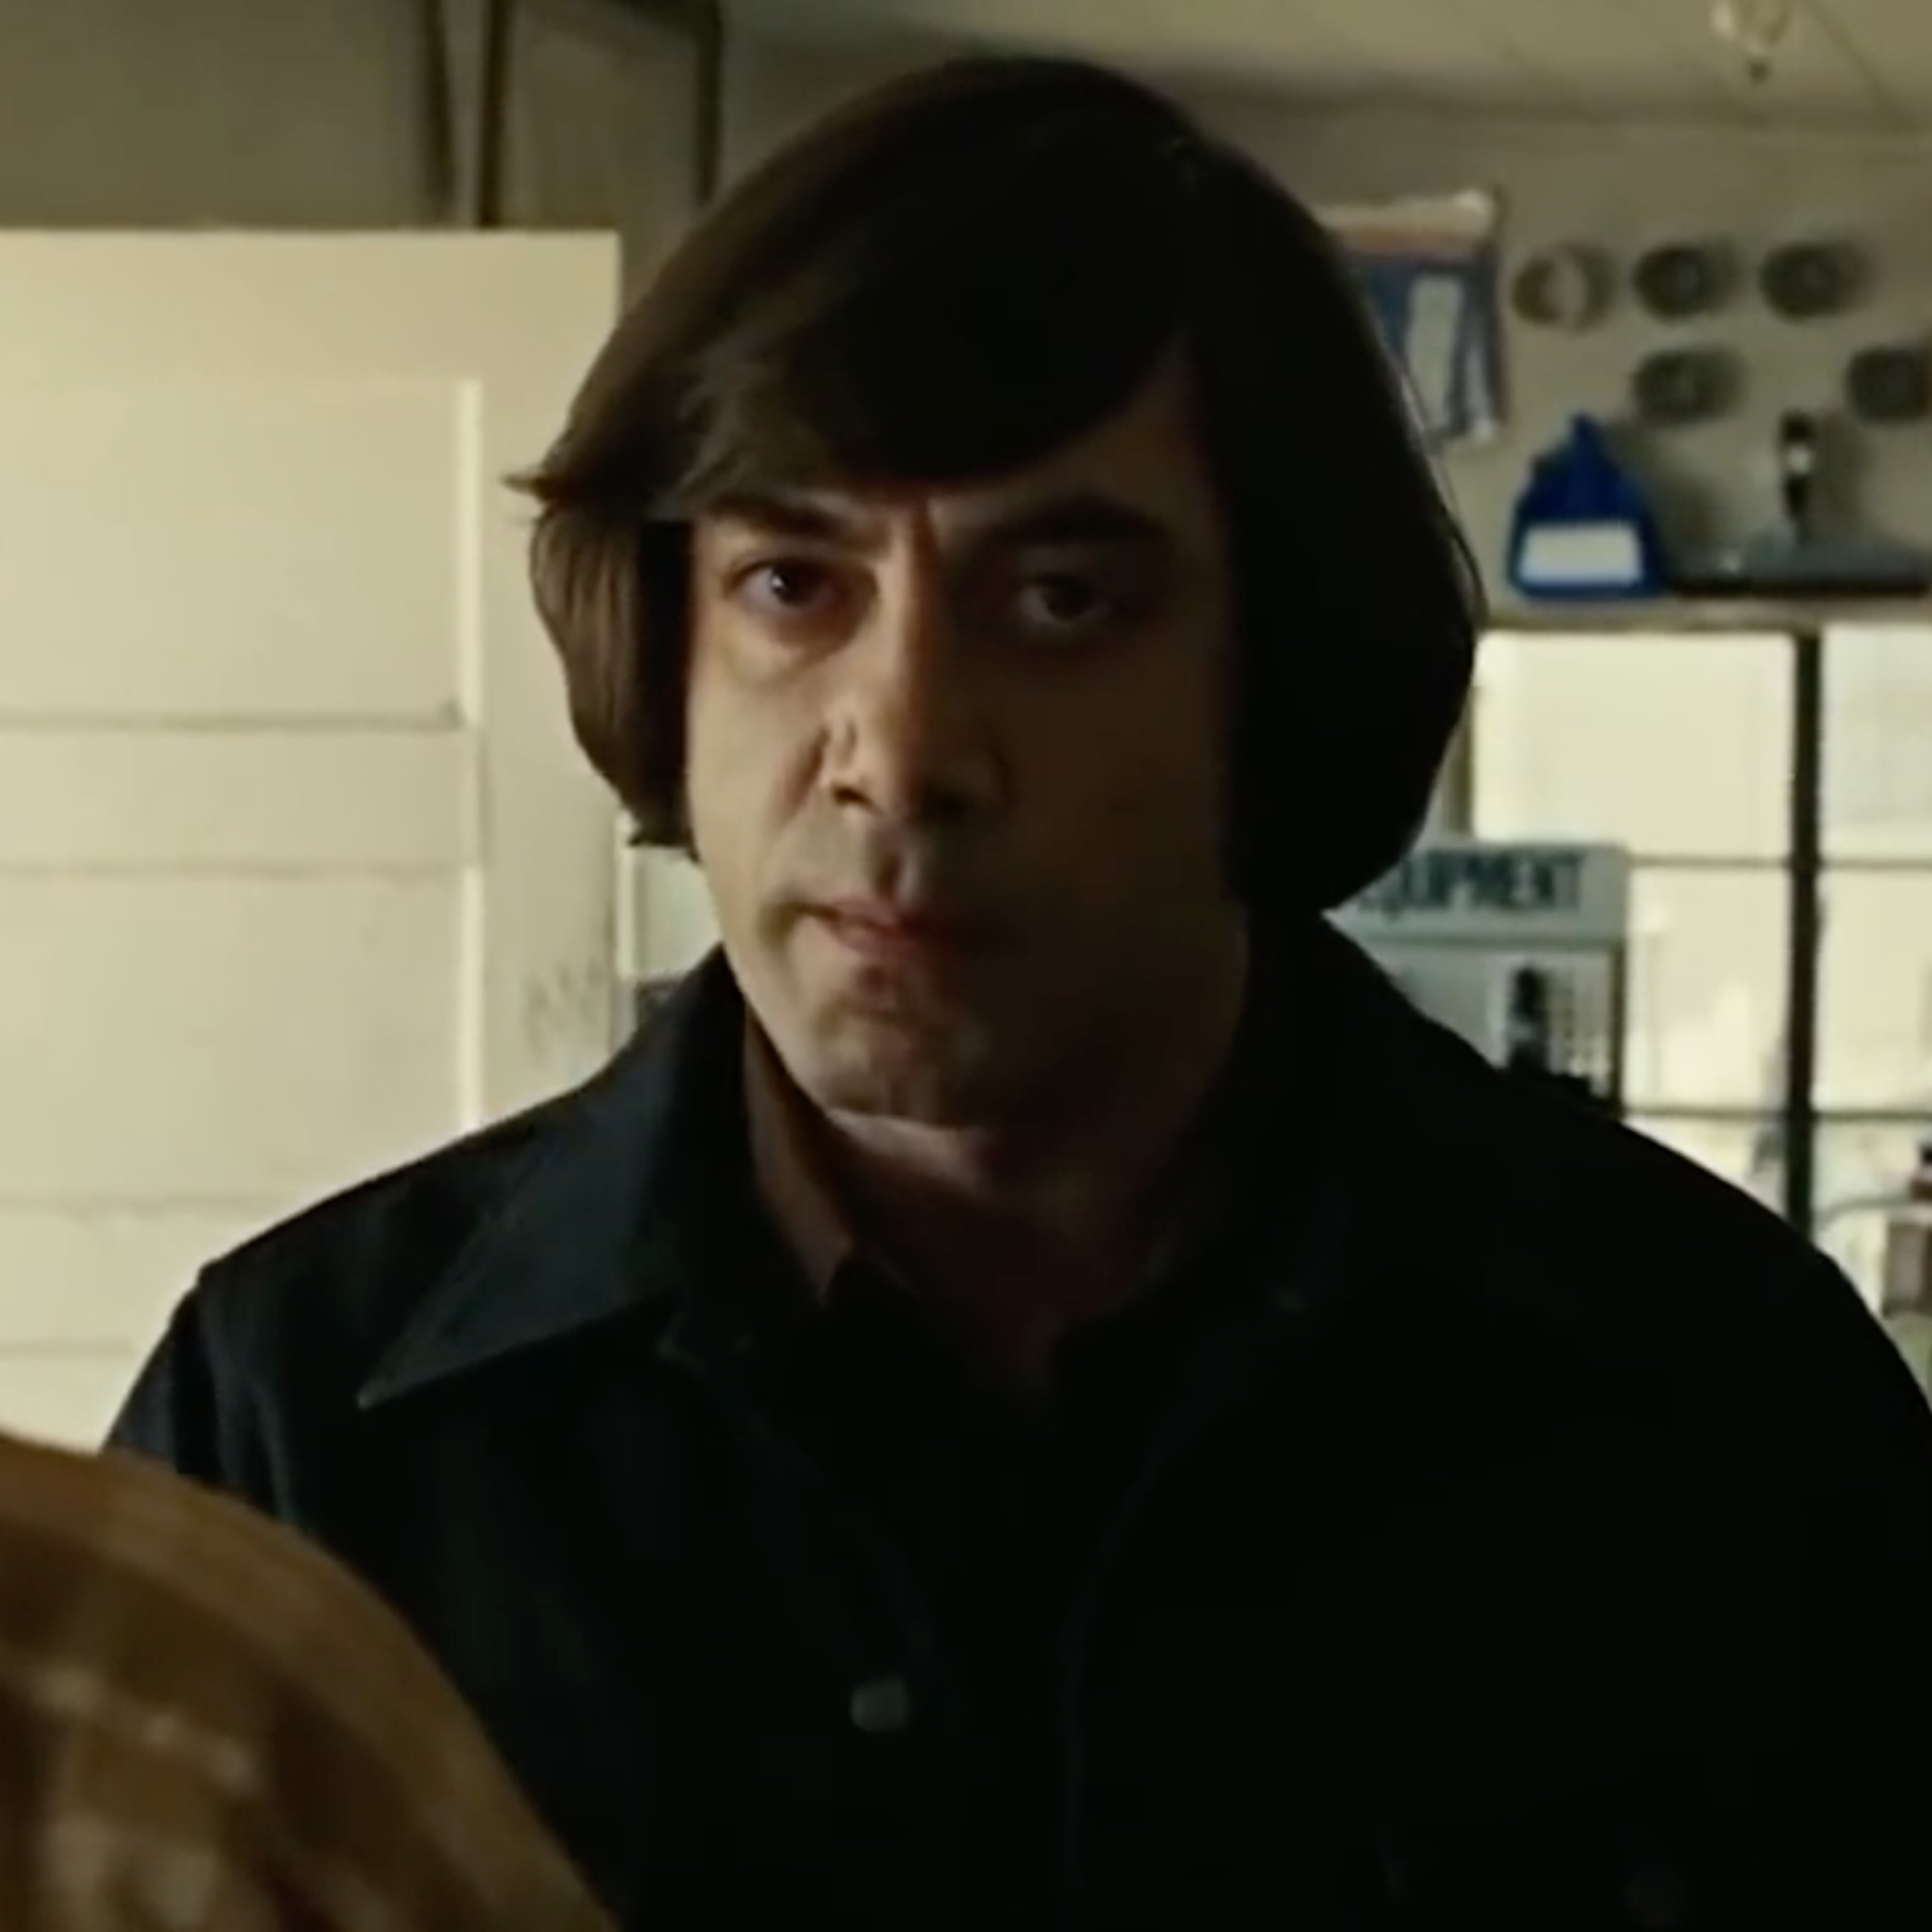 A GIF of the character of Anton Chigurh from No Country for Old Men staring directly at the camera thanks to the adjustment by AI.